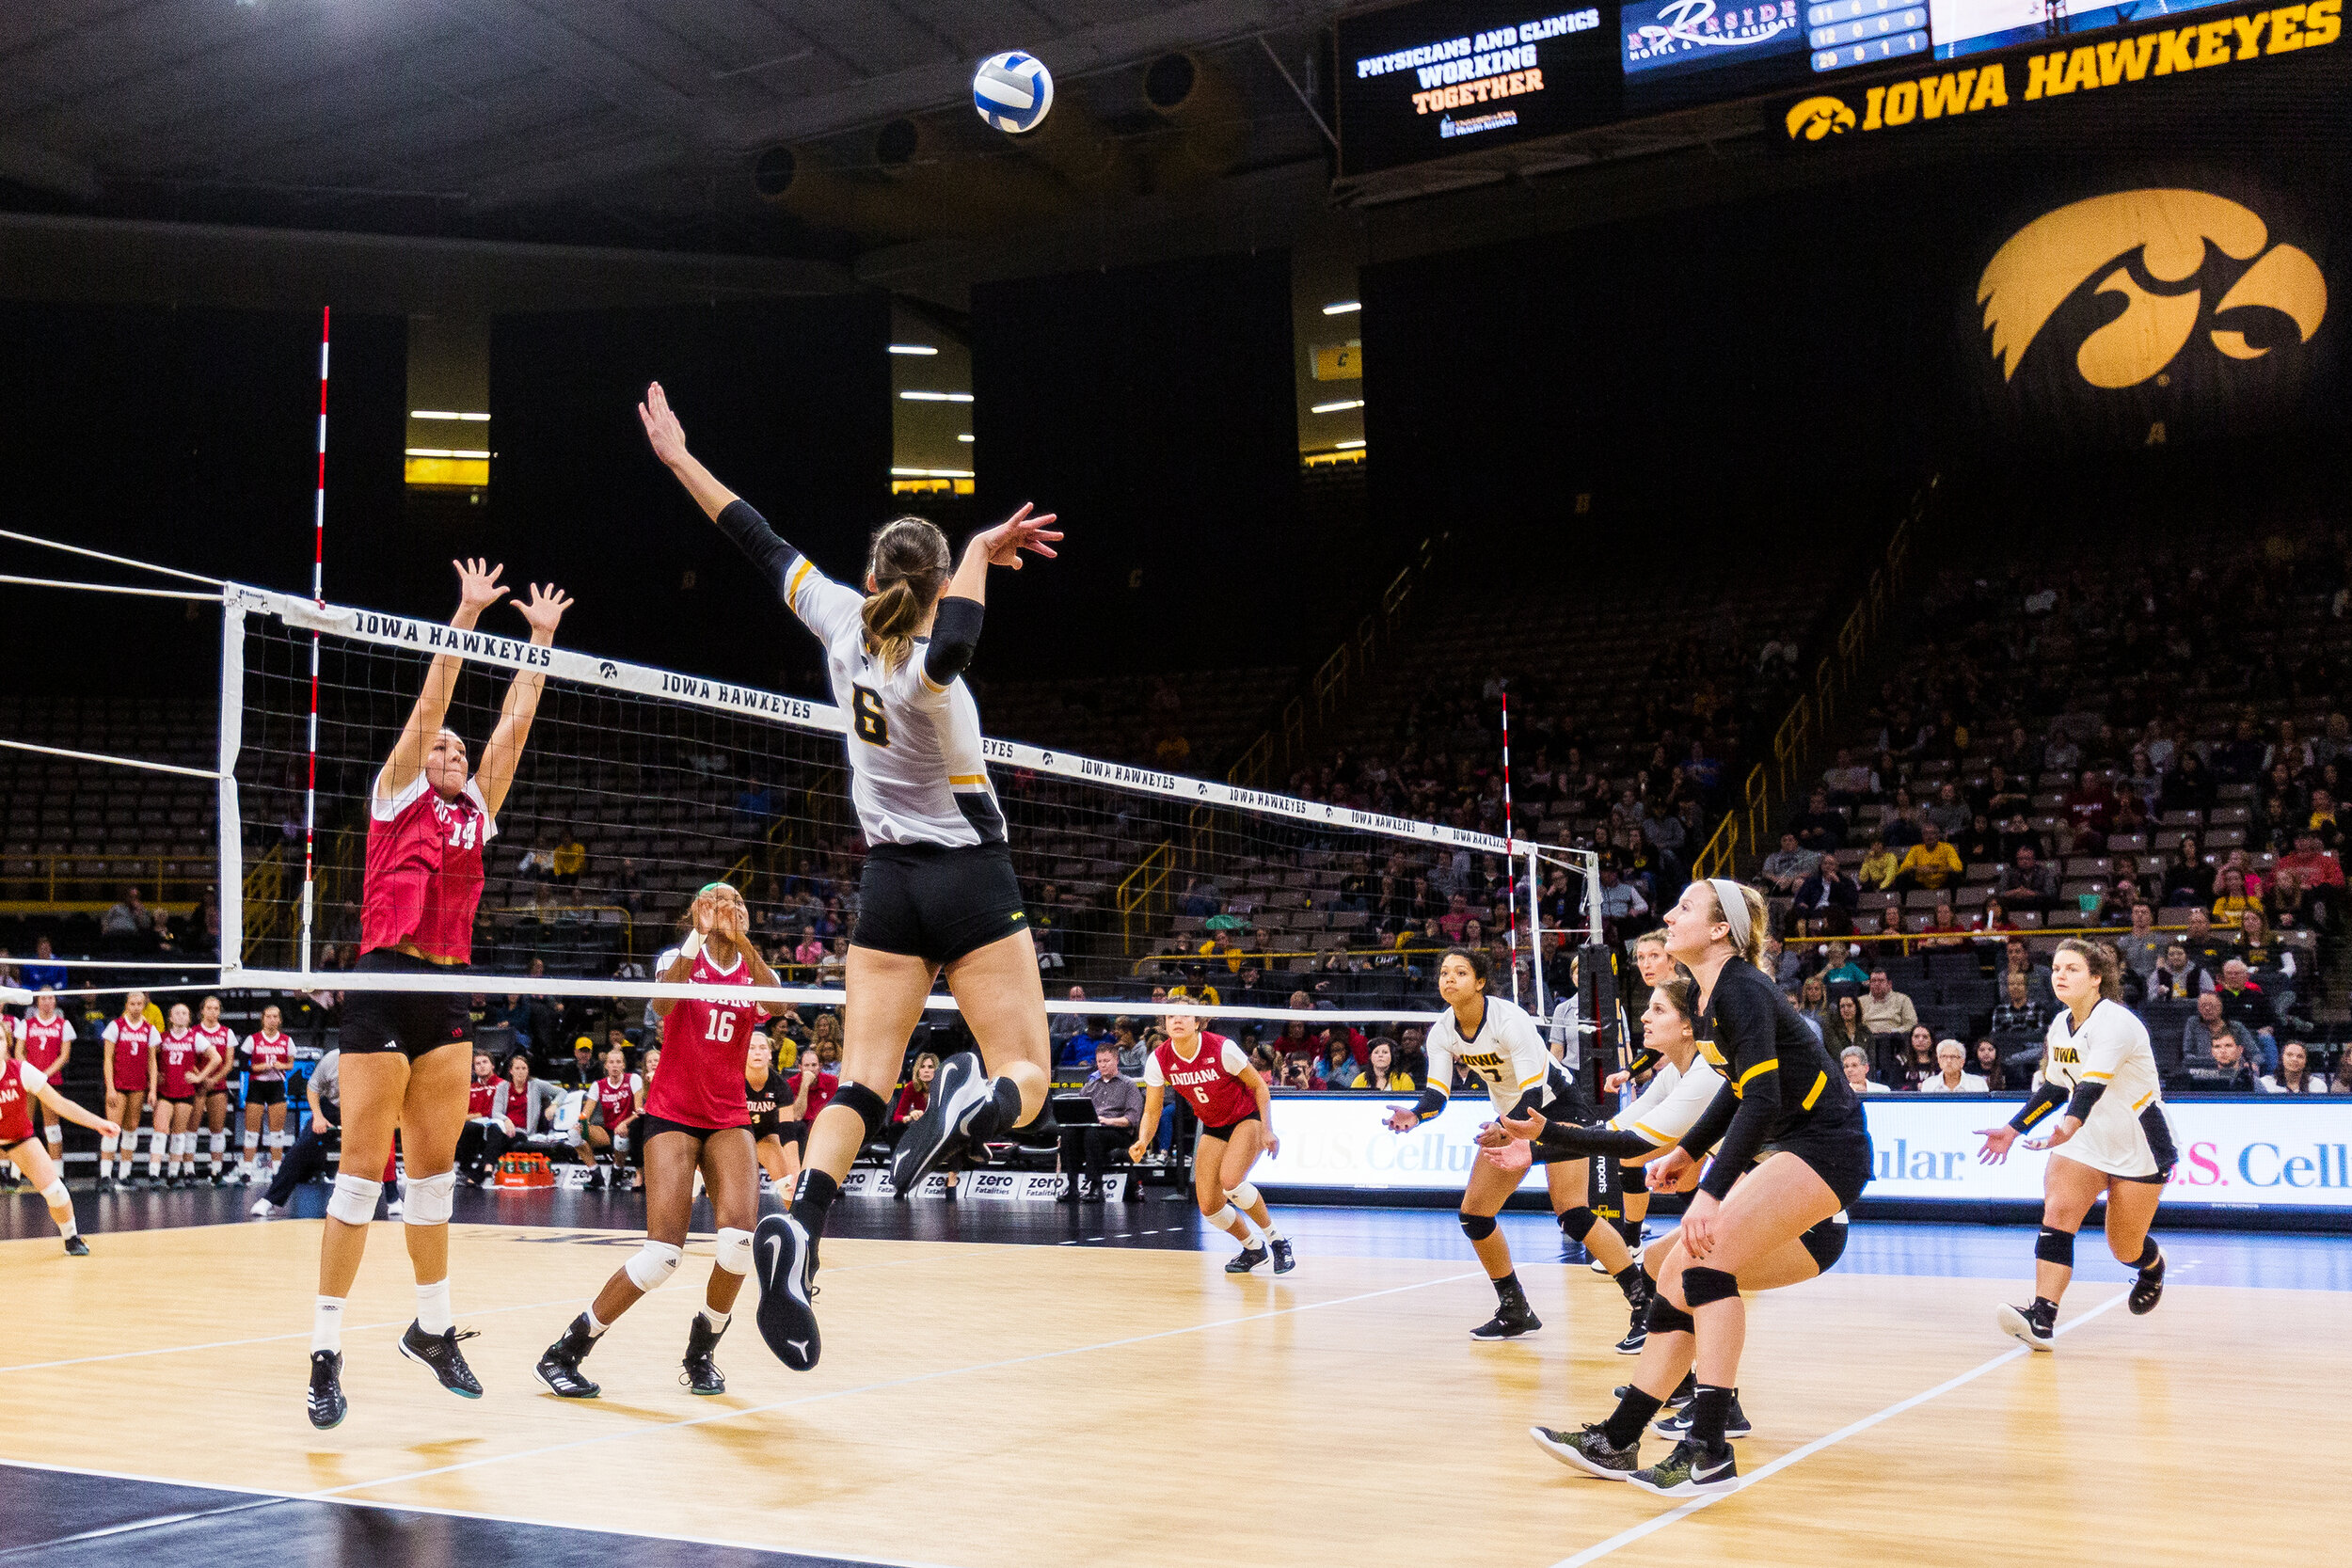  Iowa’s Kasey Reuter winds up to hit the ball during a volleyball match against Indiana University on Friday, Nov. 3, 2017. The Hawkeyes defeated the Hoosiers 3-0.  